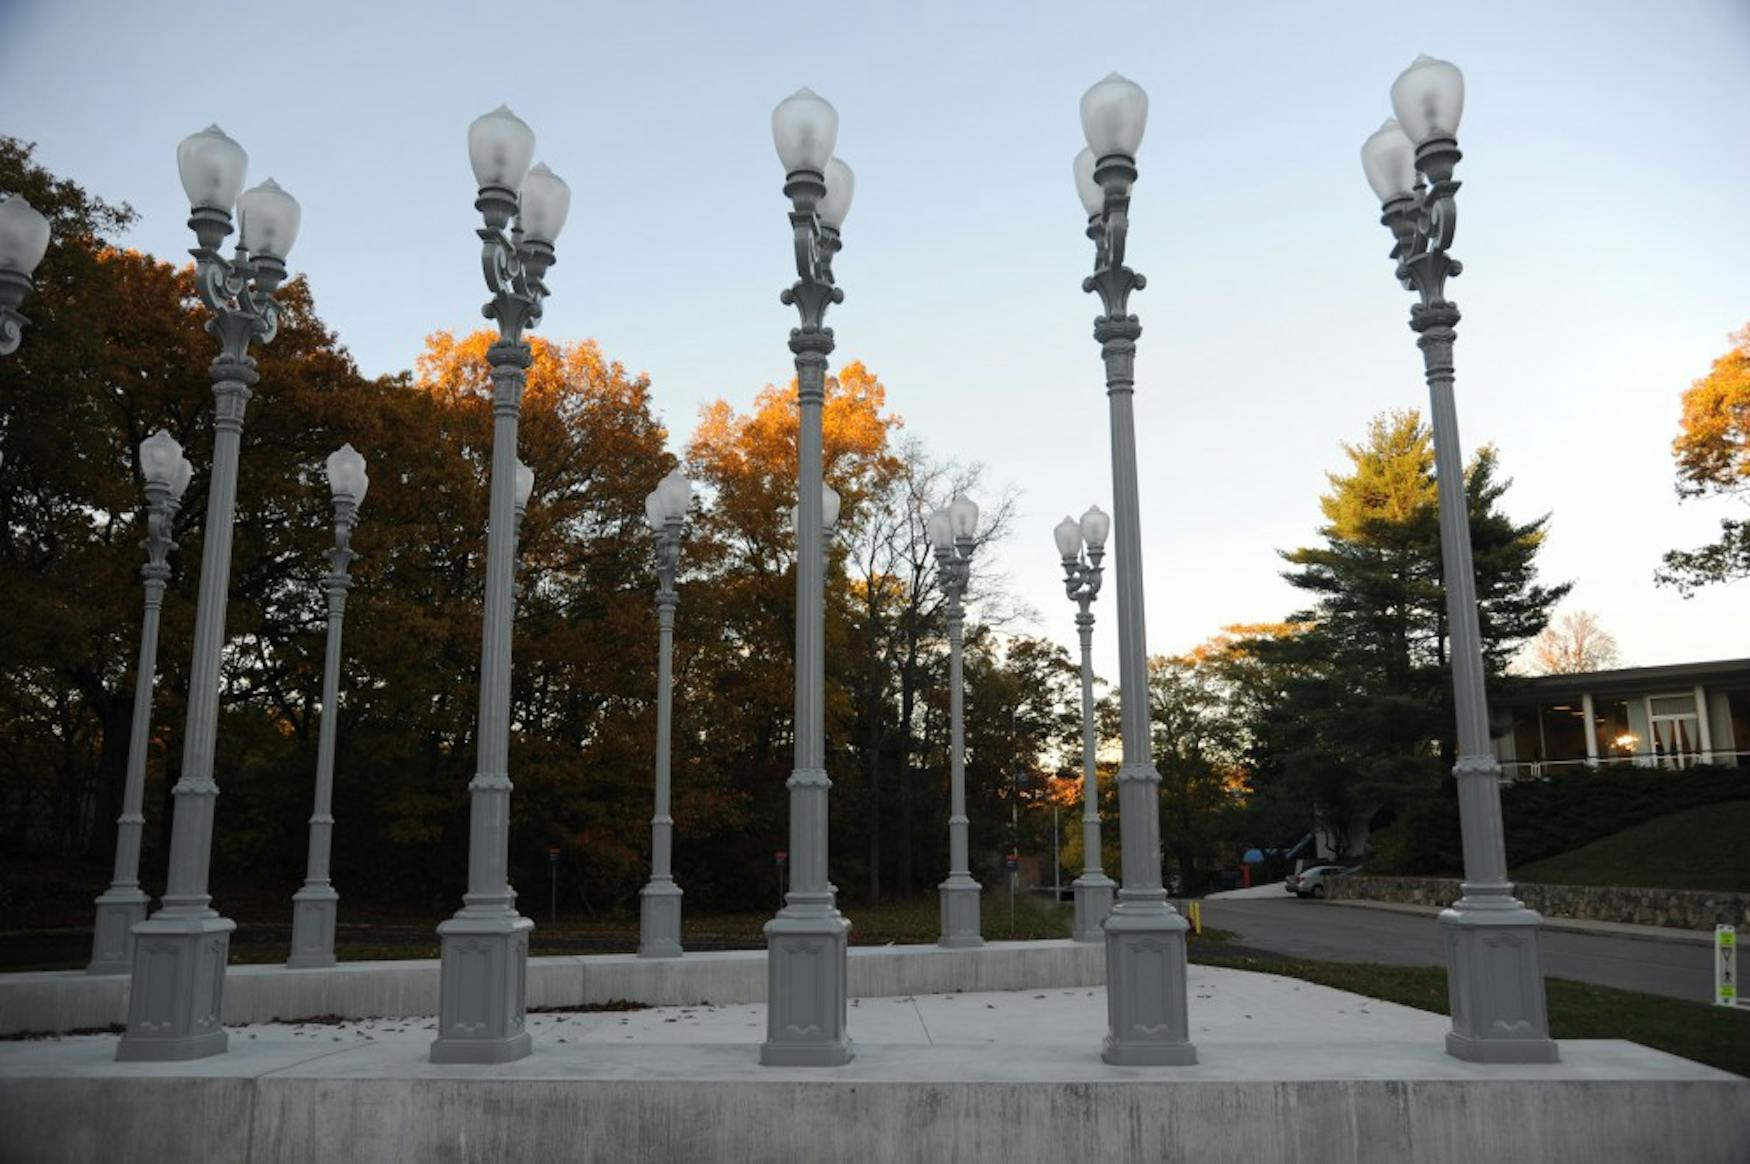 LIGHT THE WAY: “Light of Reason” by Chris Burden was the inspiration for the theme for this year’s Festival of the Arts.